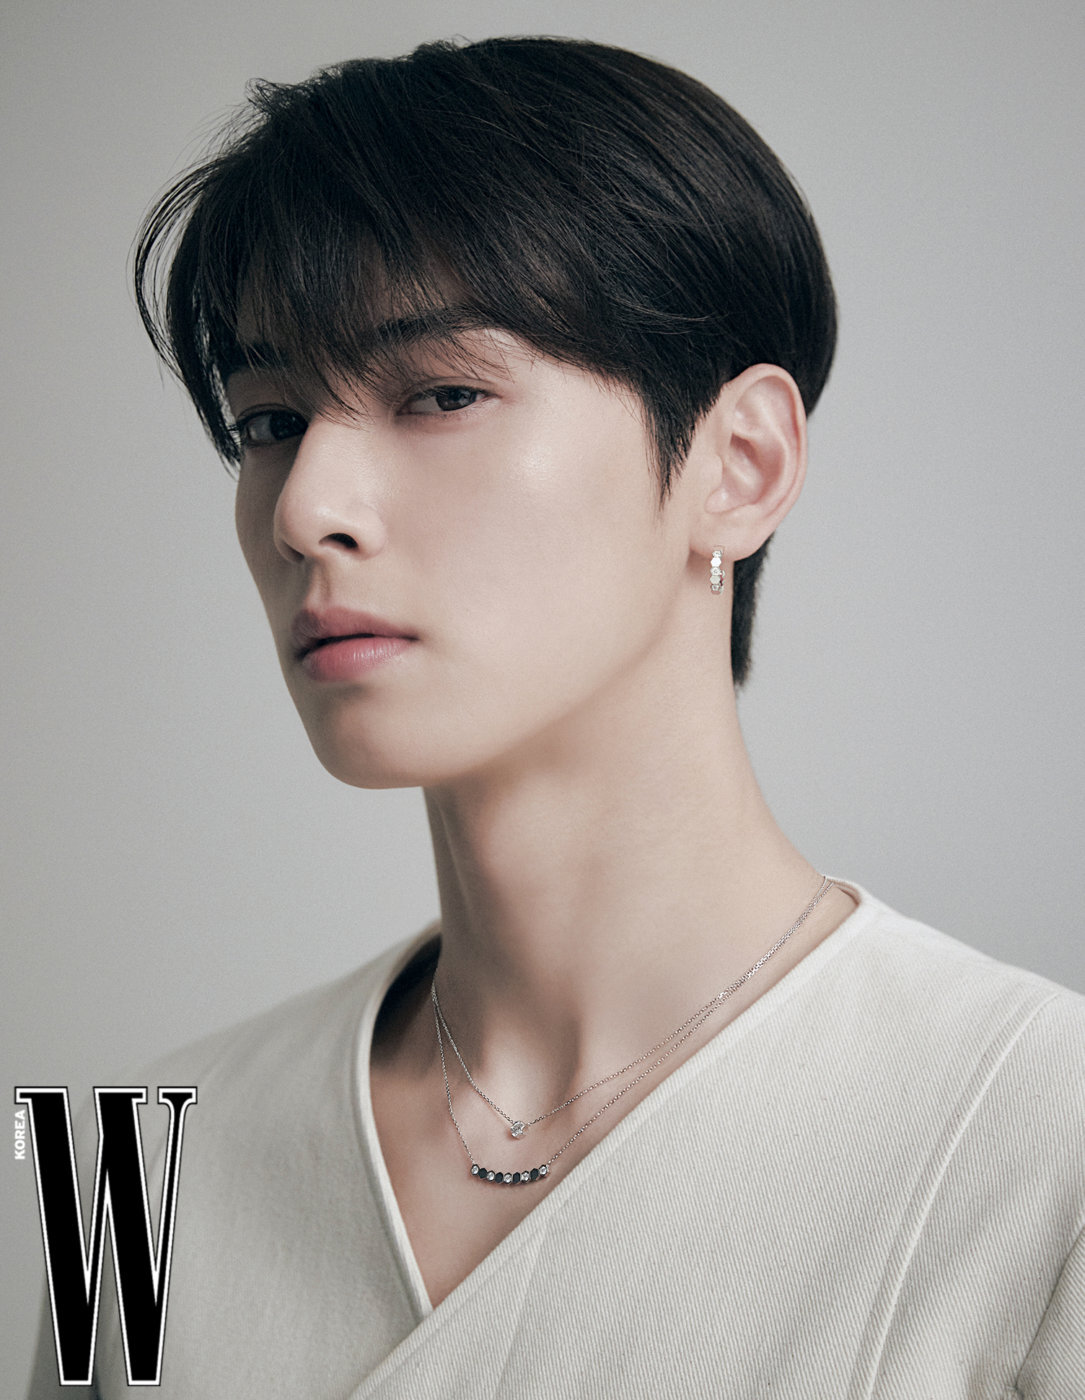 Cha Eun-woo's look for the Chaumet pop-up store event in Seoul wins the  internet: The prince of Chaumet is back